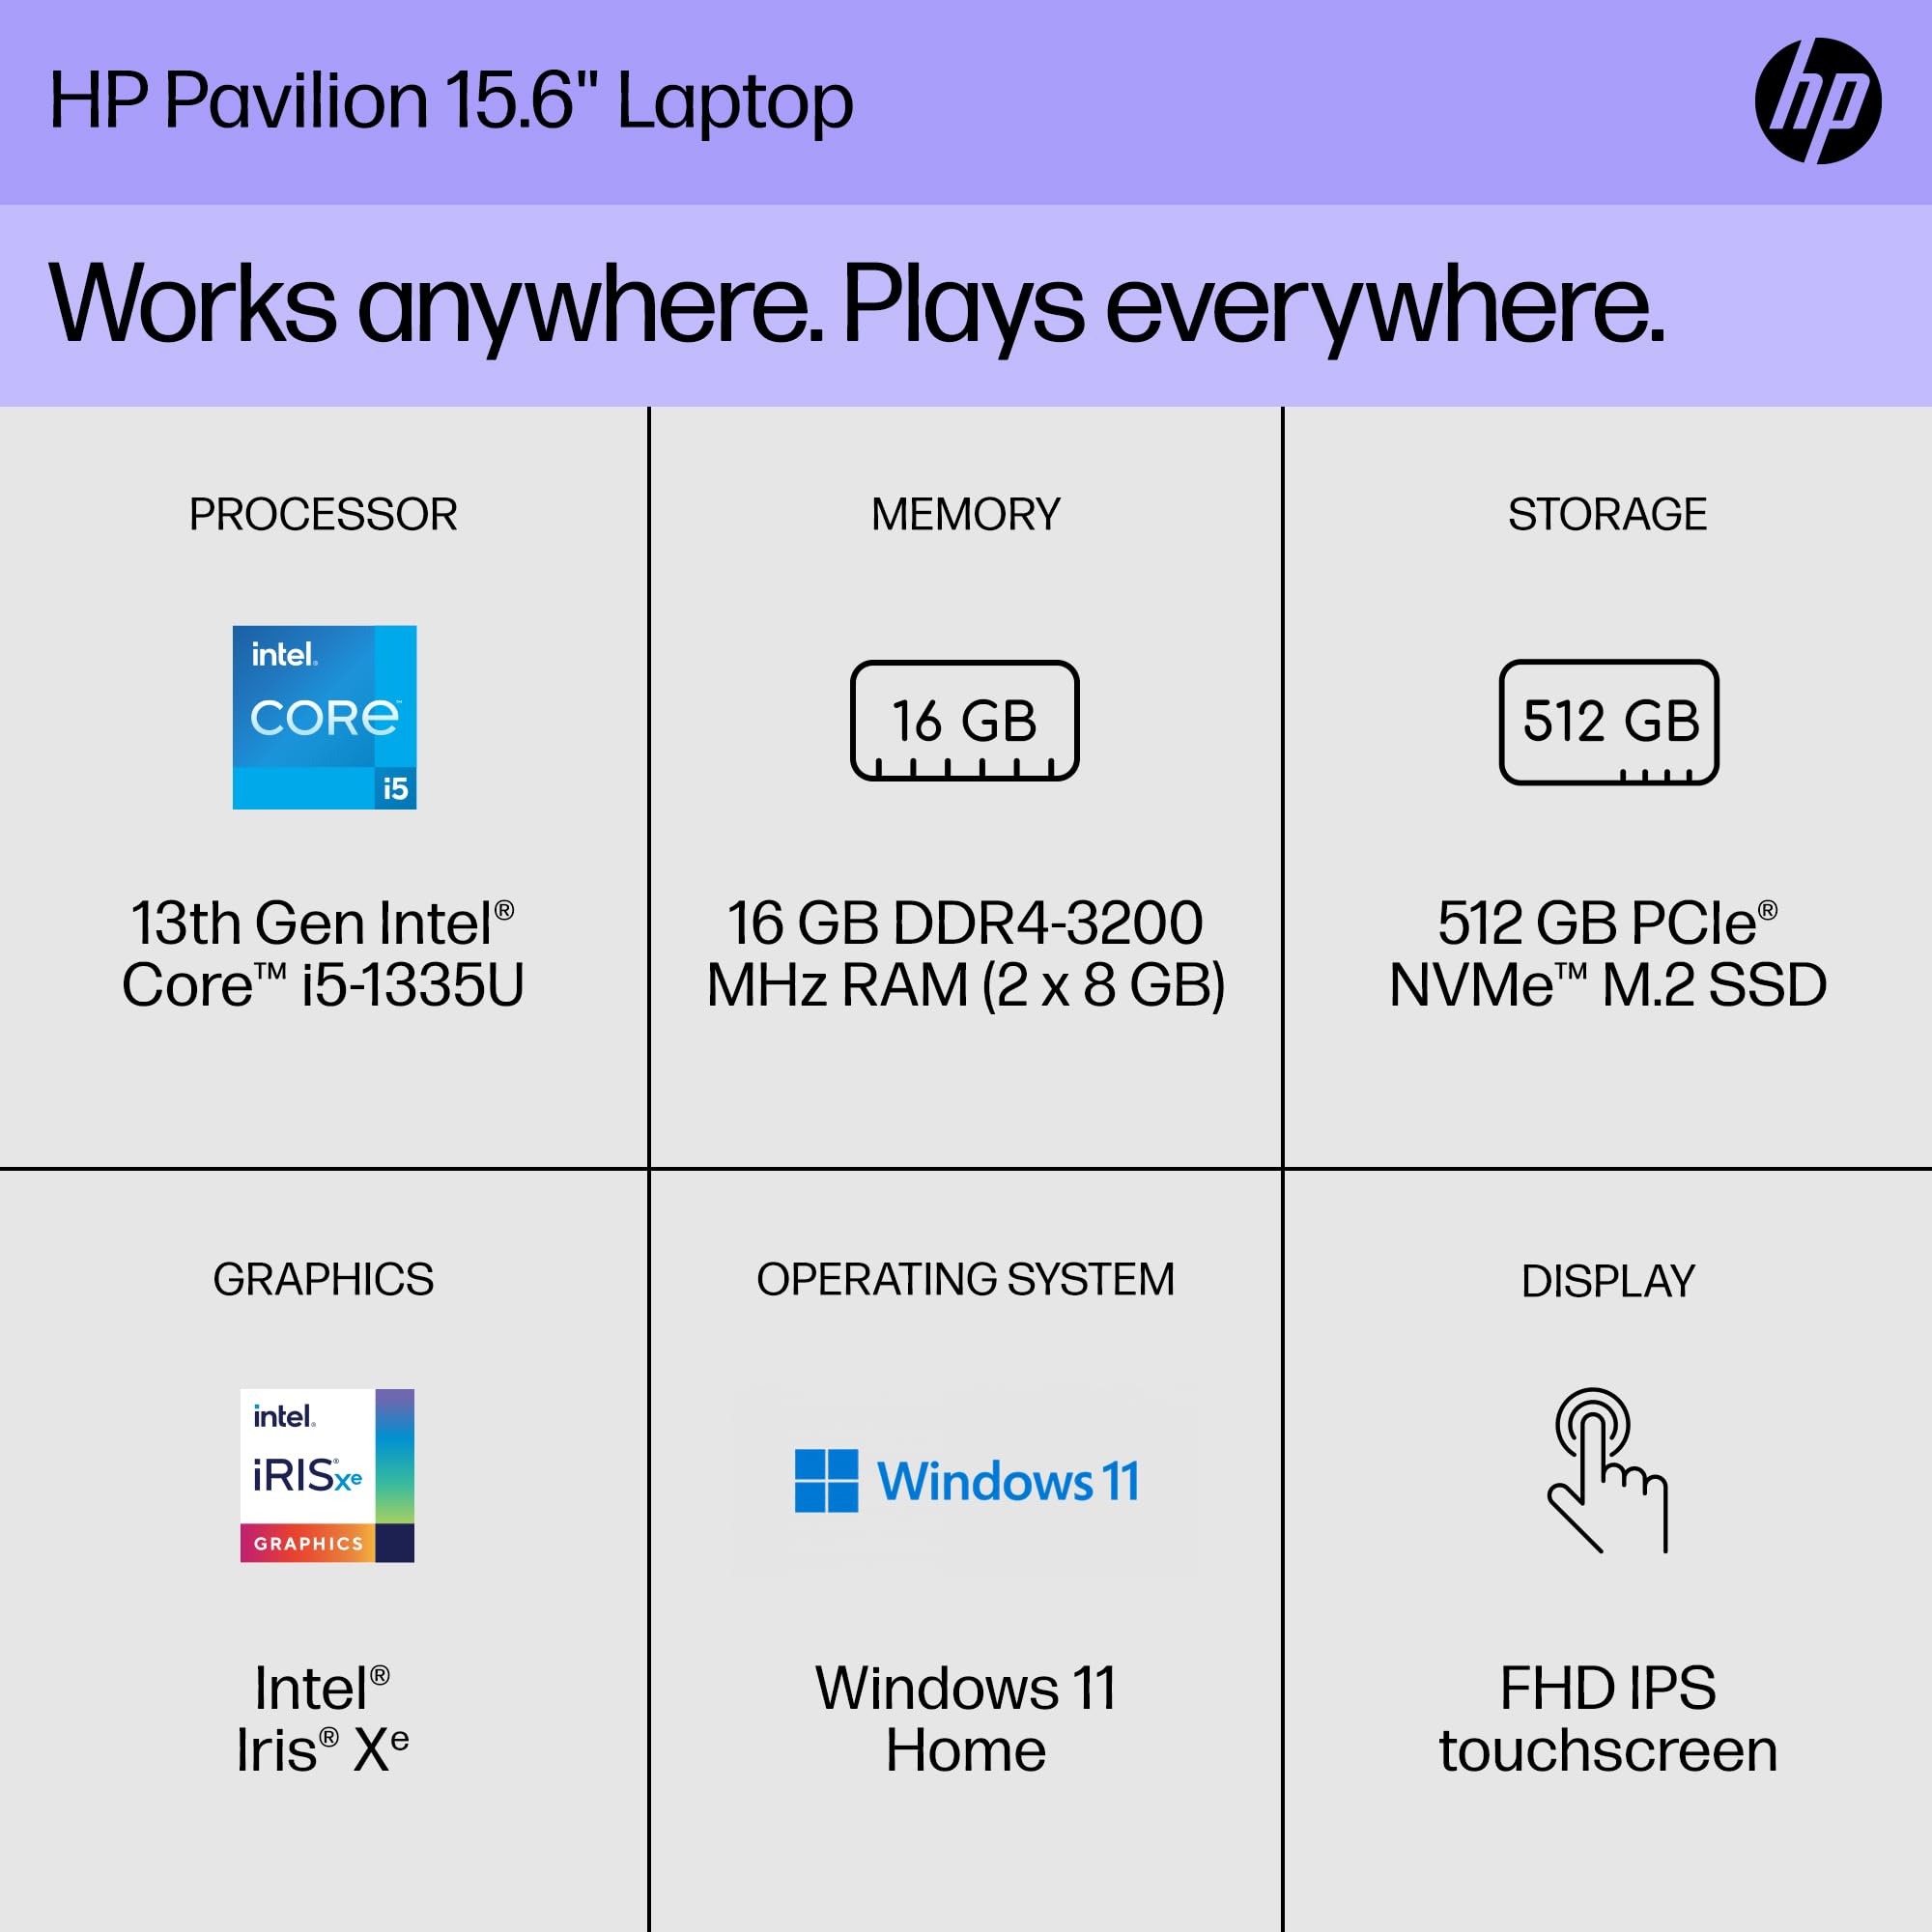 HP 2023 Newest Pavilion Laptop for Business, 15.6" FHD Touchscreen, Intel Core i5-1335U(up to 4.6GHz, Beats i7-1270P) 16GB RAM, 512GB SSD, Intel Iris Xe Graphics, Wi-Fi 6, Webcam, Windows 11 Home